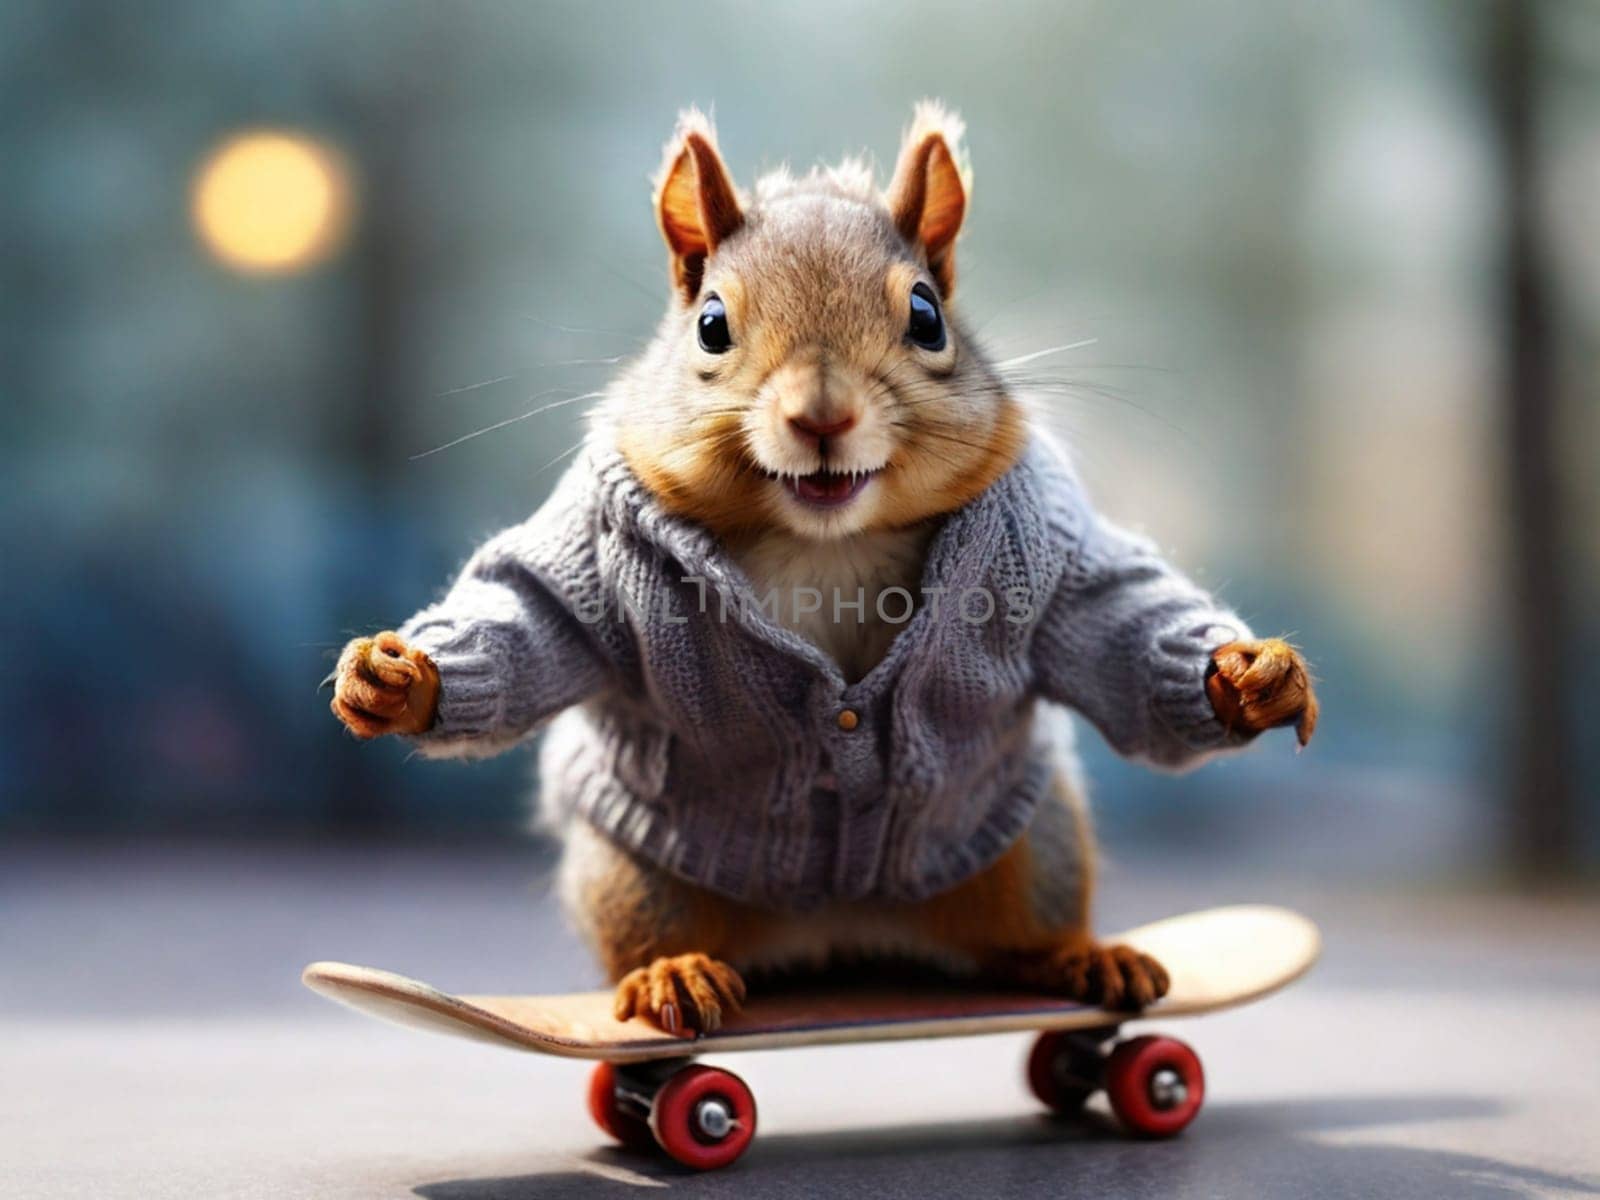 A funny squirrel in a sweater flies on a skateboard. by Ekaterina34